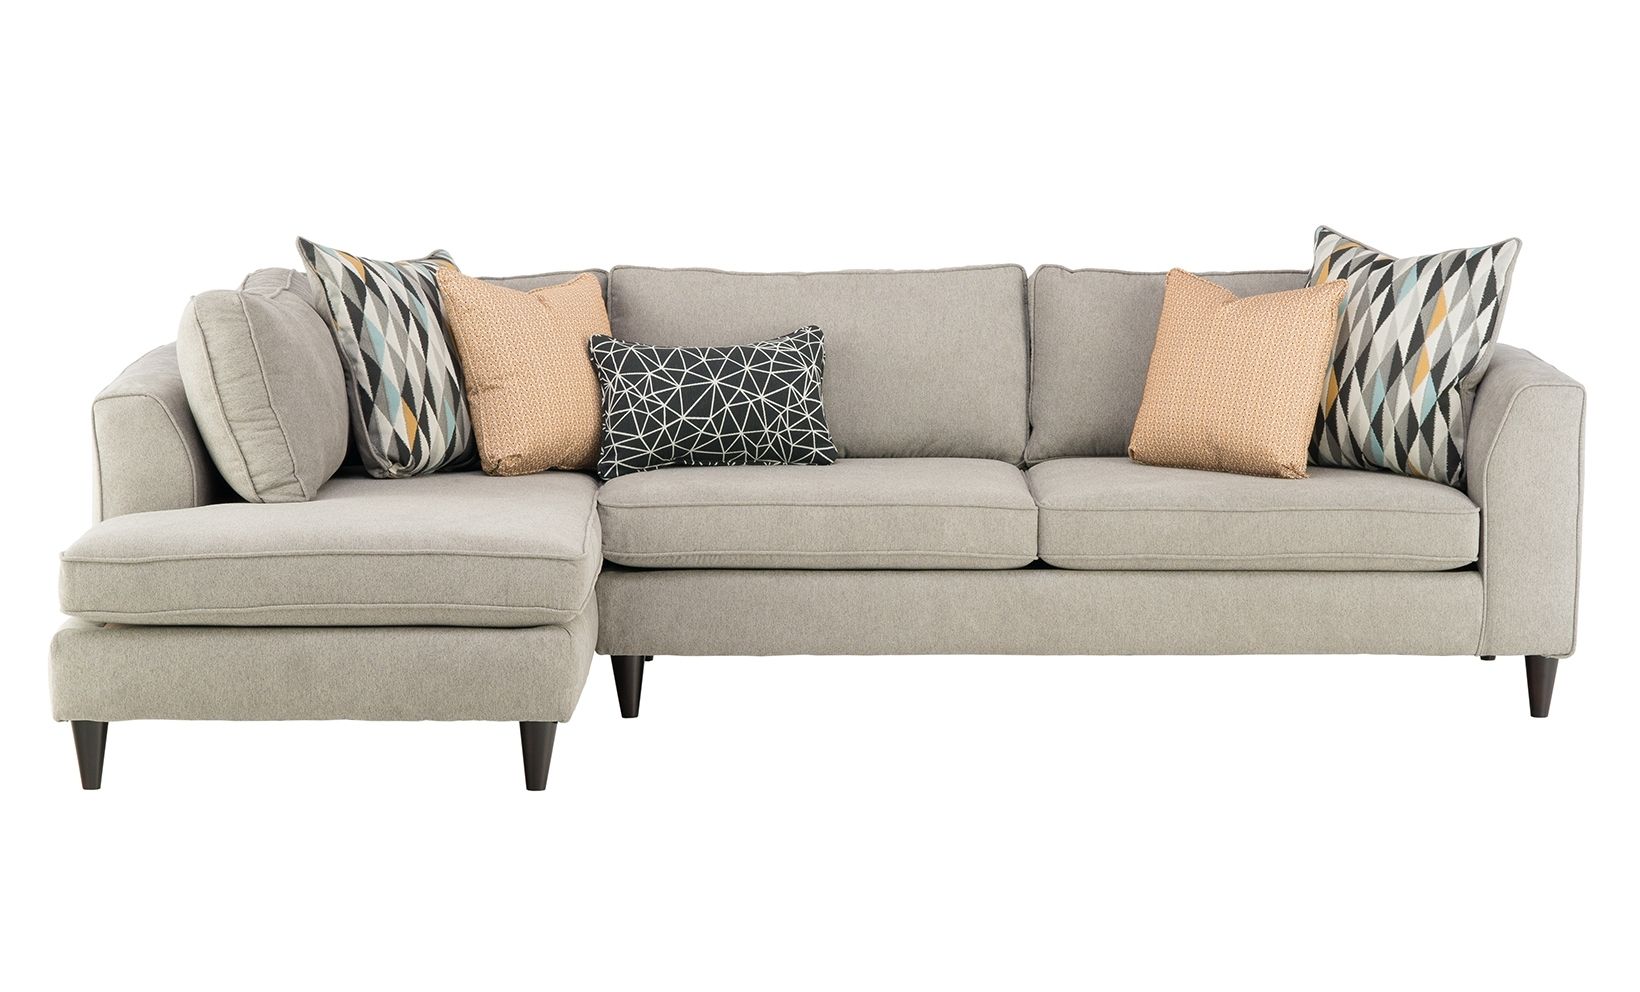 Living Room Sofa Sectionals And Theater Seating | Schneiderman's Within Duluth Mn Sectional Sofas (View 7 of 10)